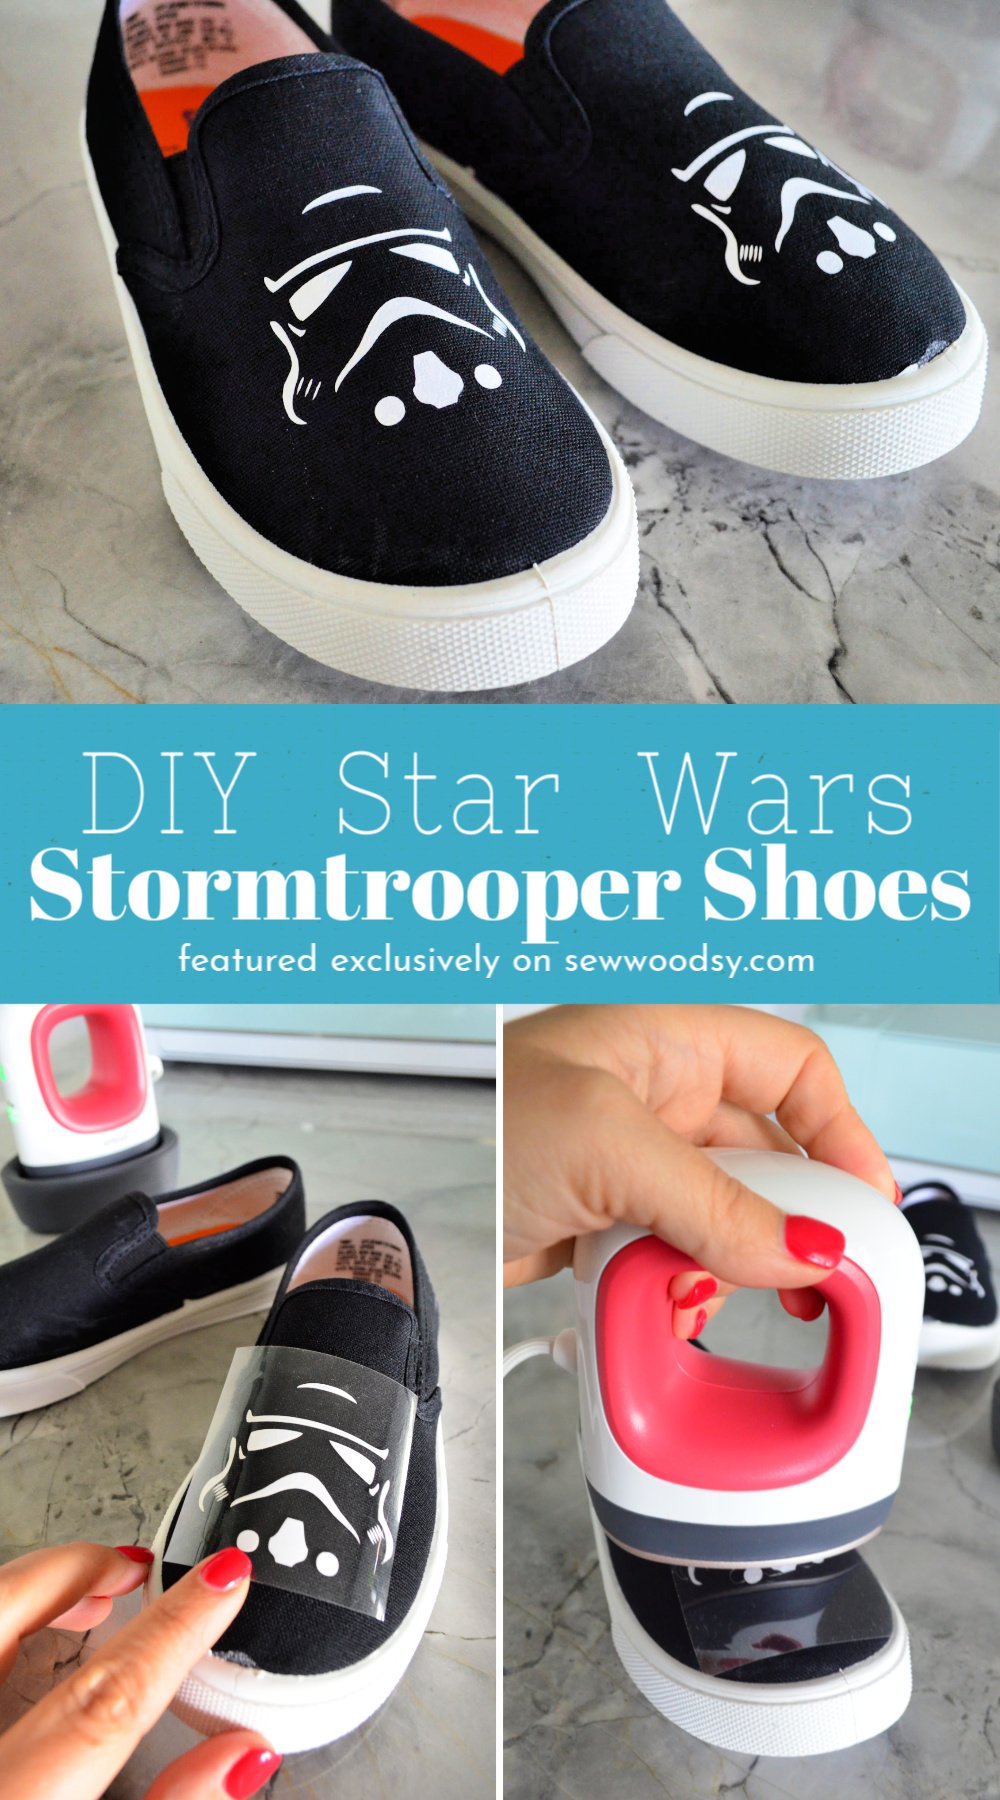 DIY Star Wars Stormtrooper Shoes collage with text